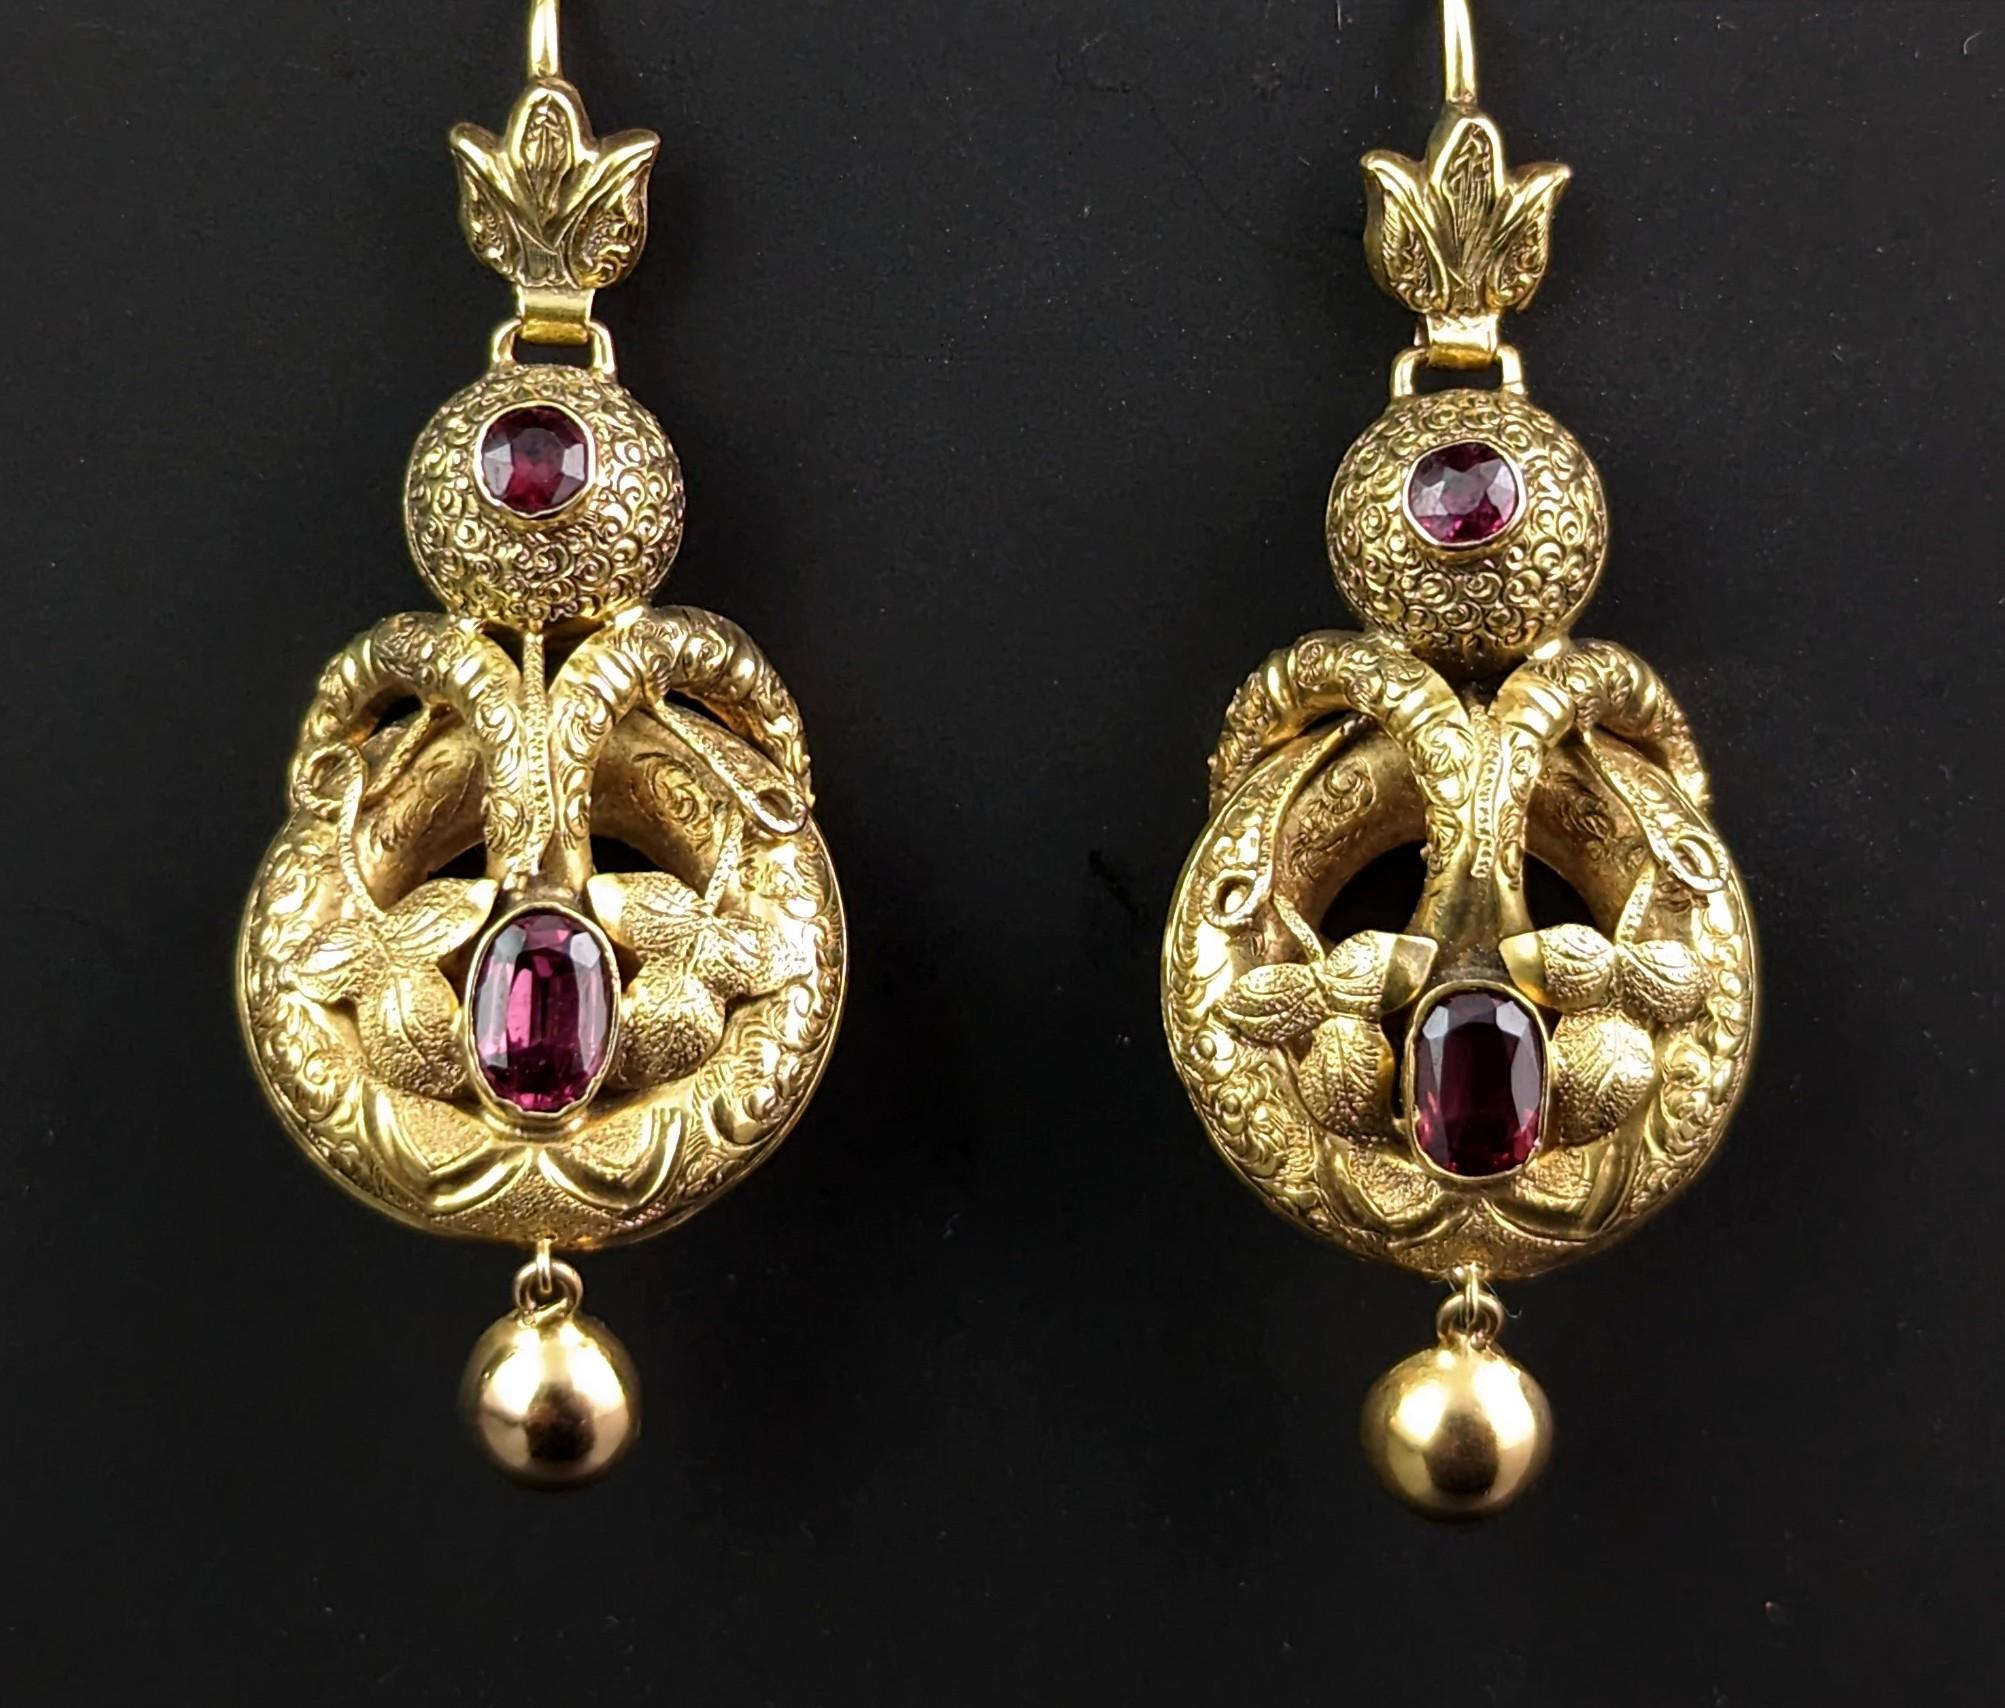 Antique Victorian Garnet Drop Earrings, 18 Carat Gold, Leaves and Vine For Sale 6